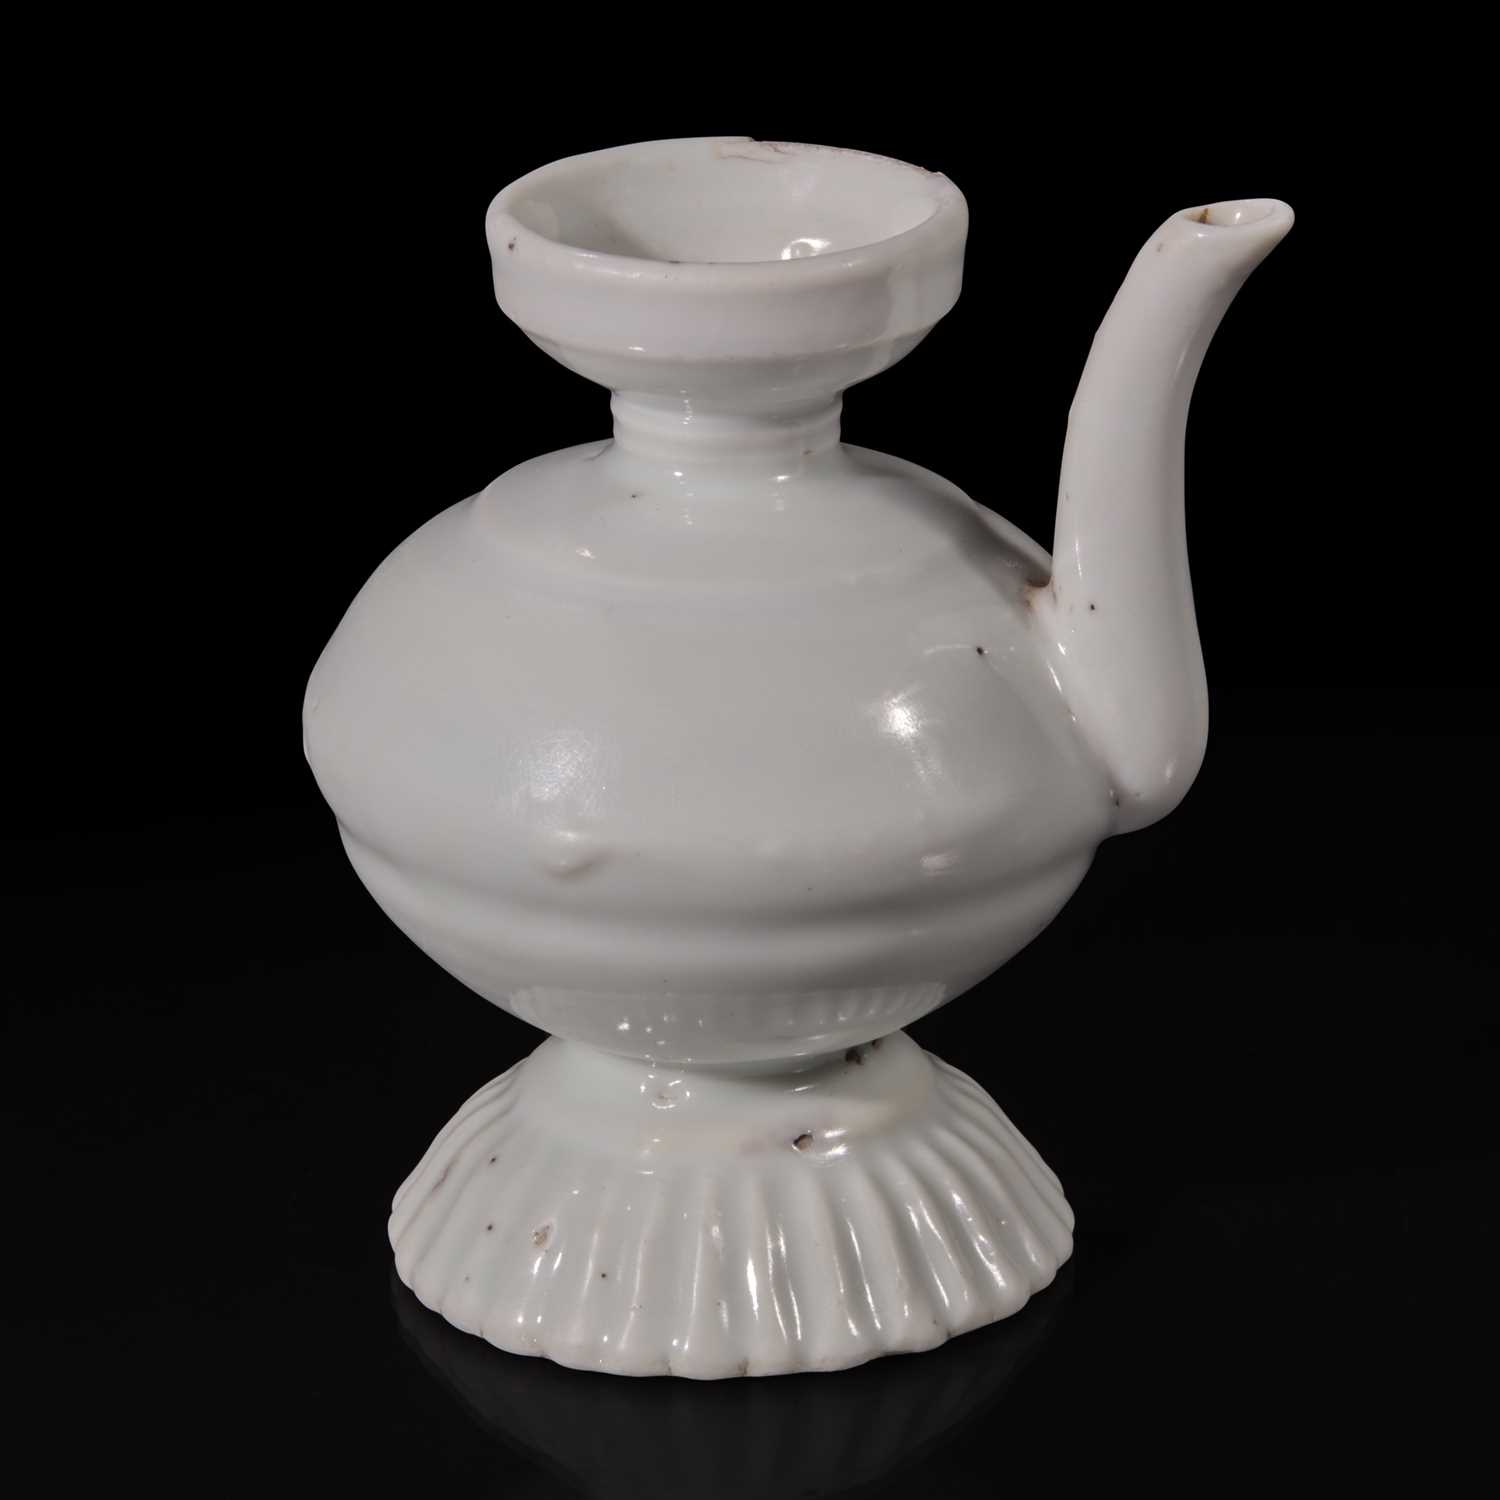 Lot 9 - A small Chinese white glazed porcelain ewer